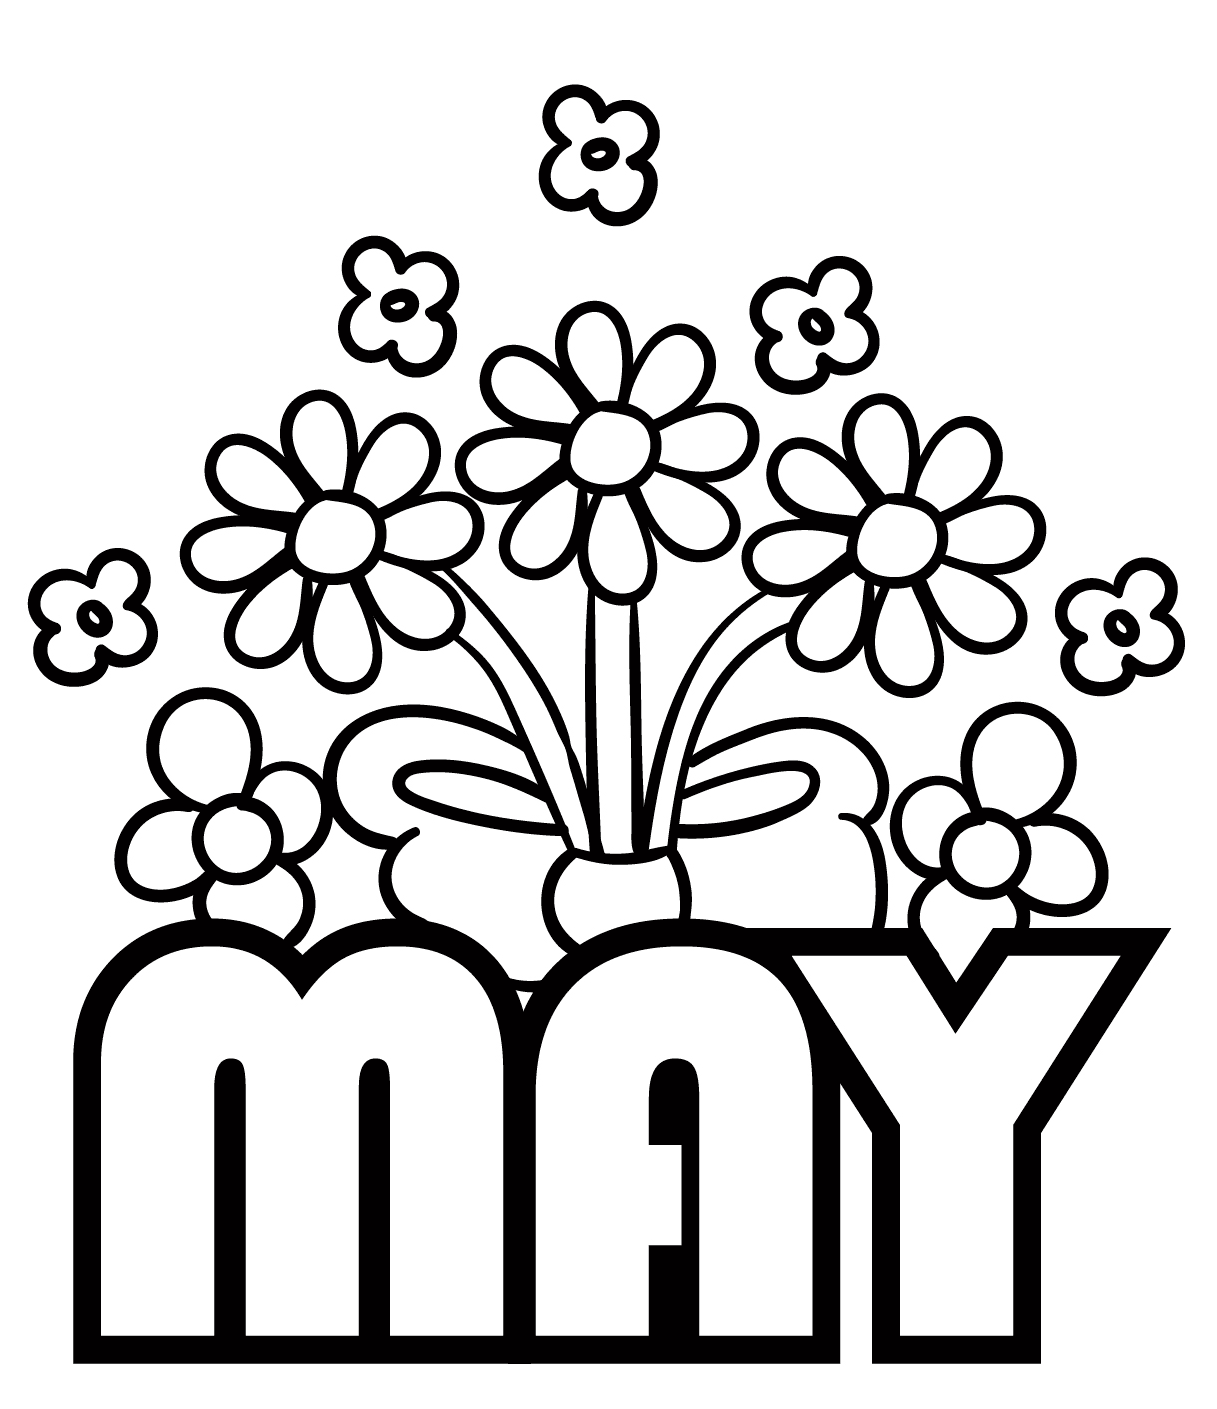 May for Children Coloring Page